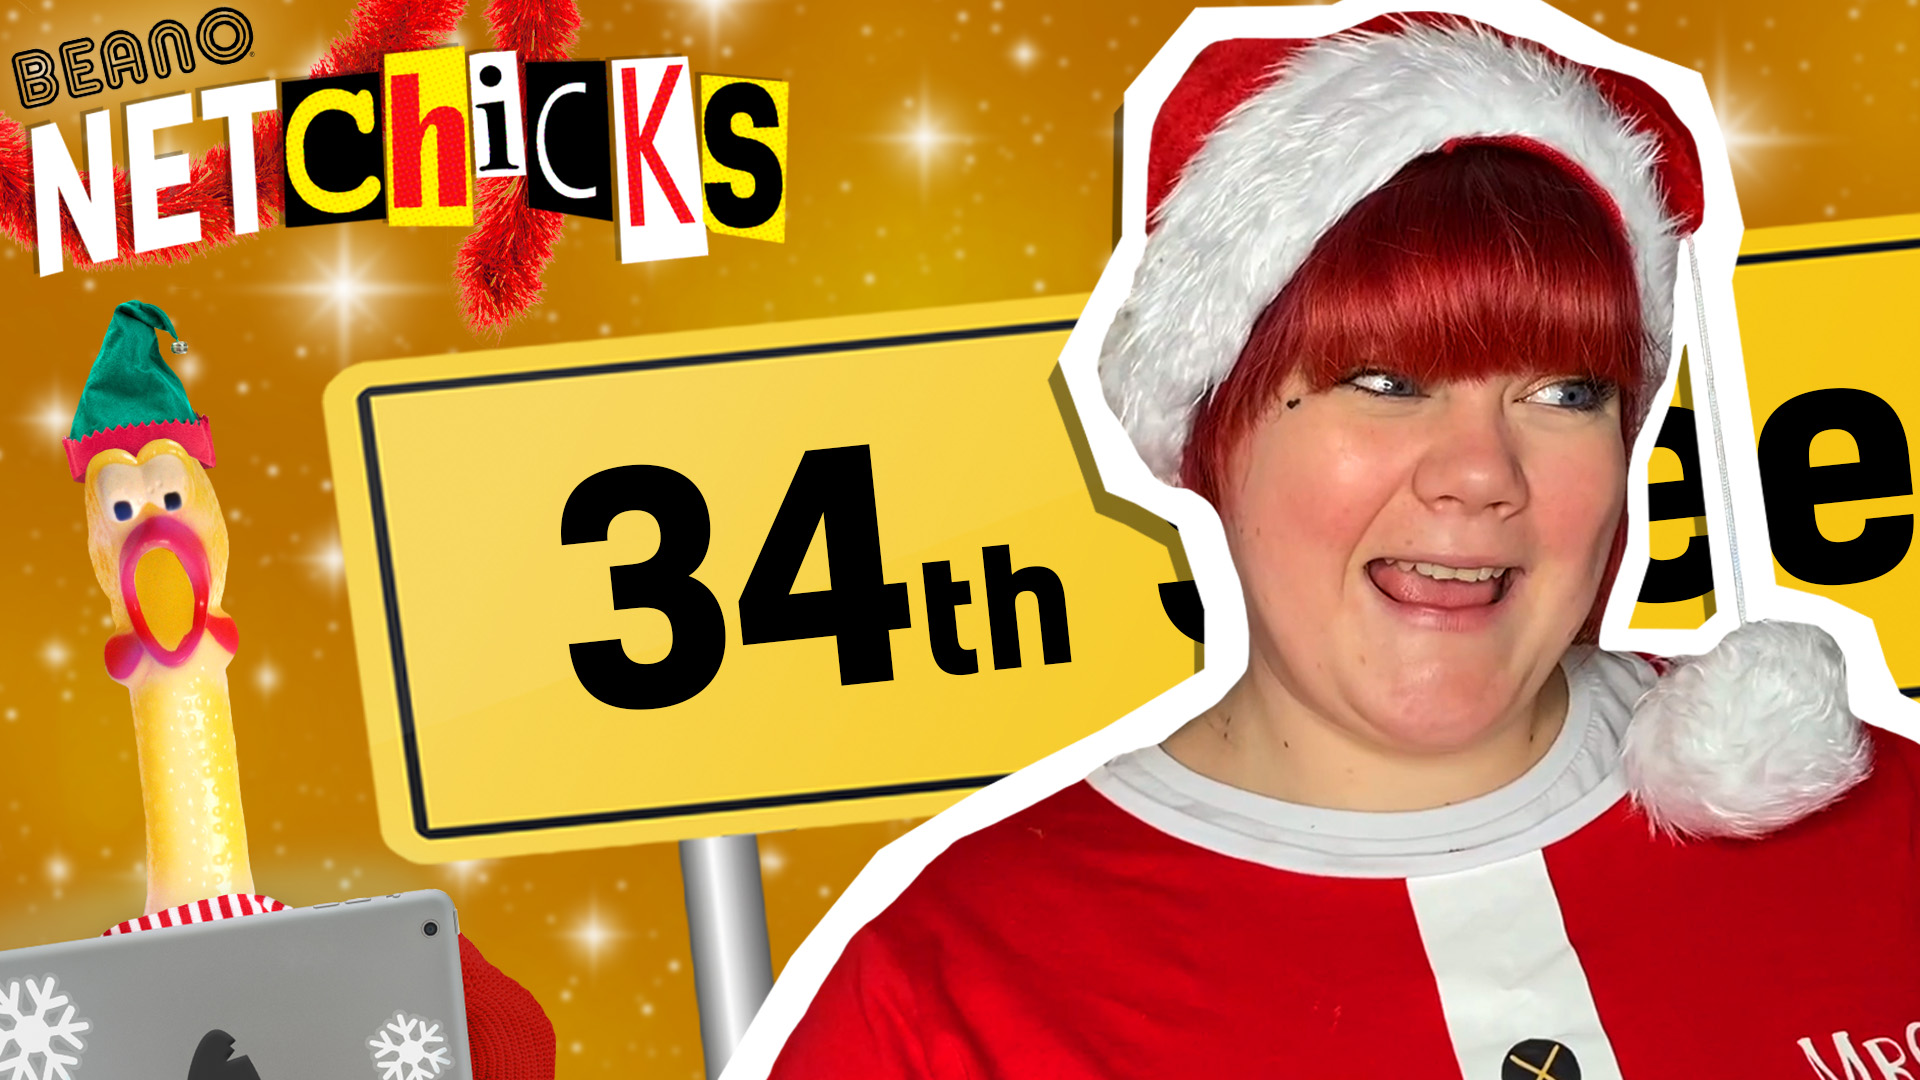 Miracle on 34th Street: A Netchicks Movie Mashup